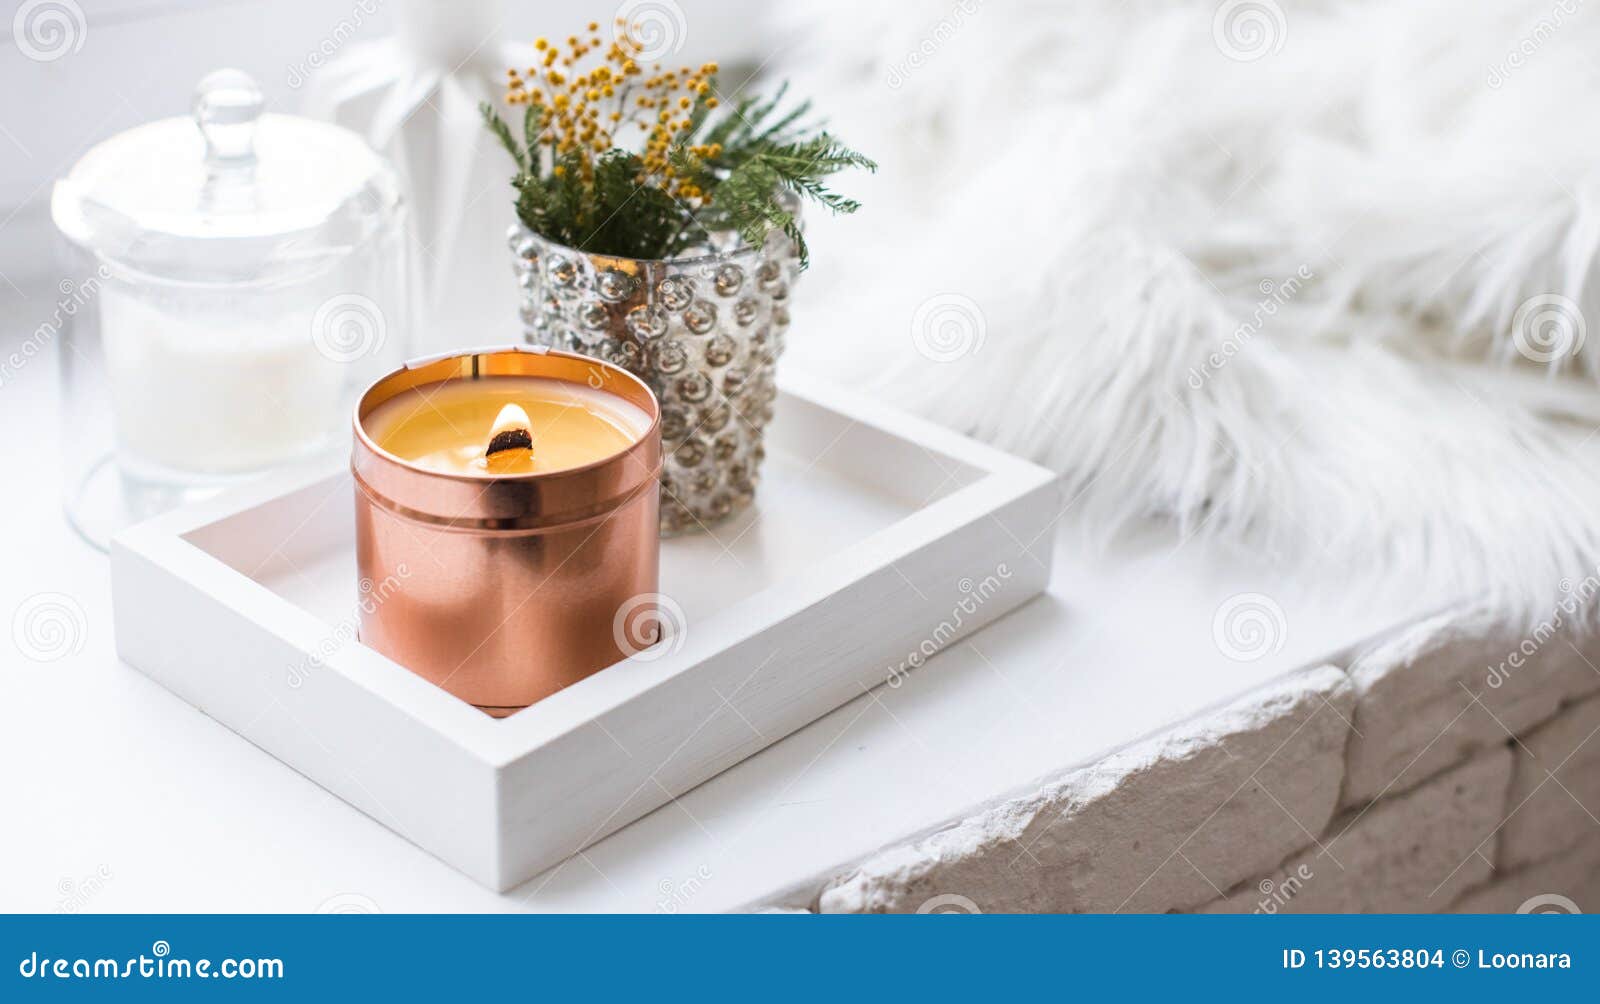 Interior Tray Decoration With Burning Candle Mimosa Flowers